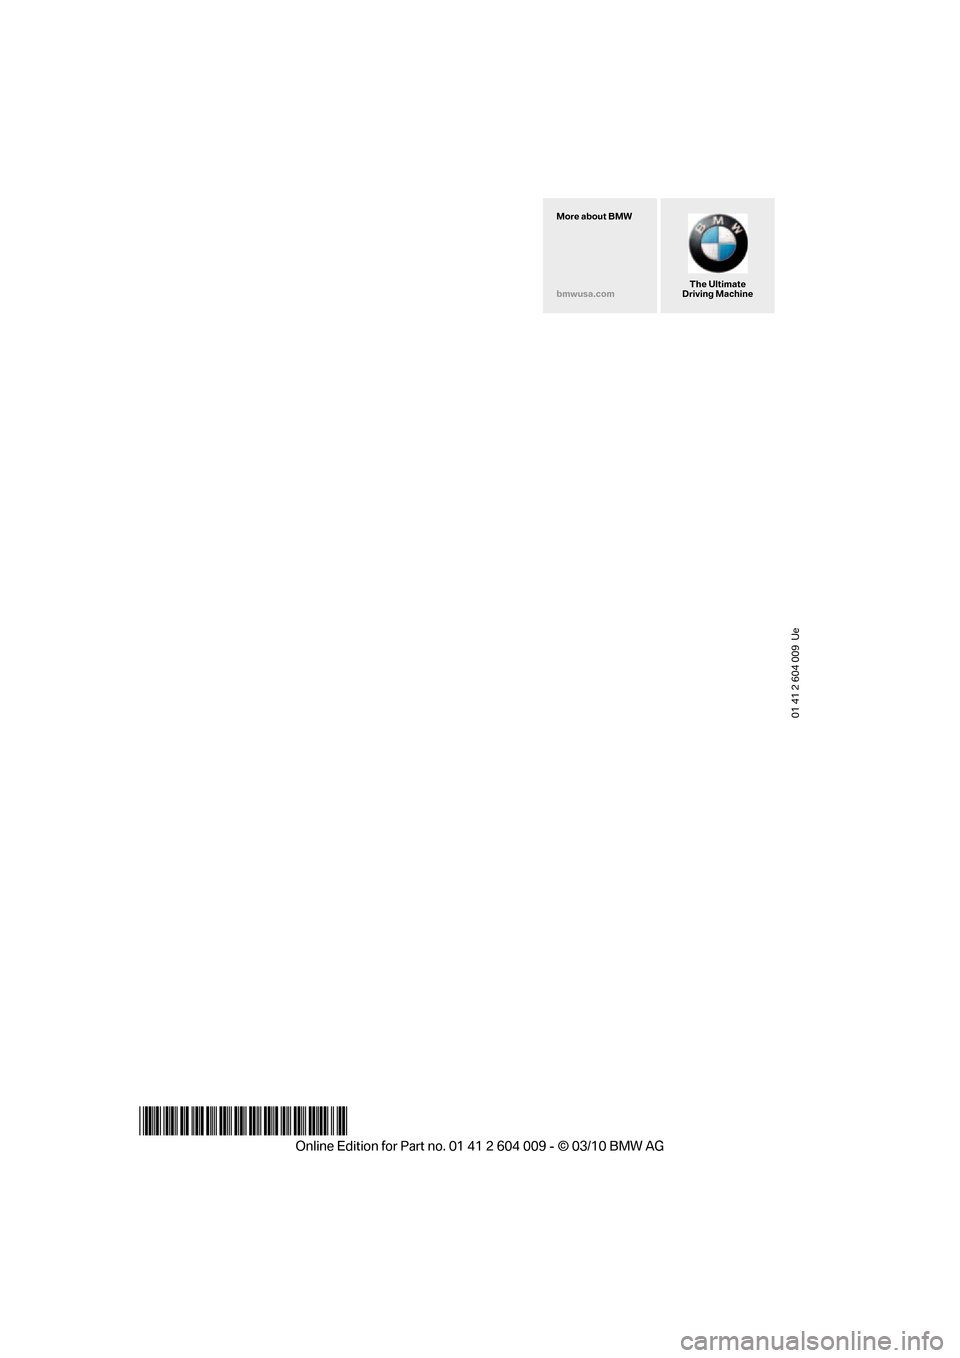 BMW X5 2011 E70 Owners Manual 01 41 2 604 009  Ue
*BL260400900P*
The Ultimate
Driving Machine More about BMW
bmwusa.com 